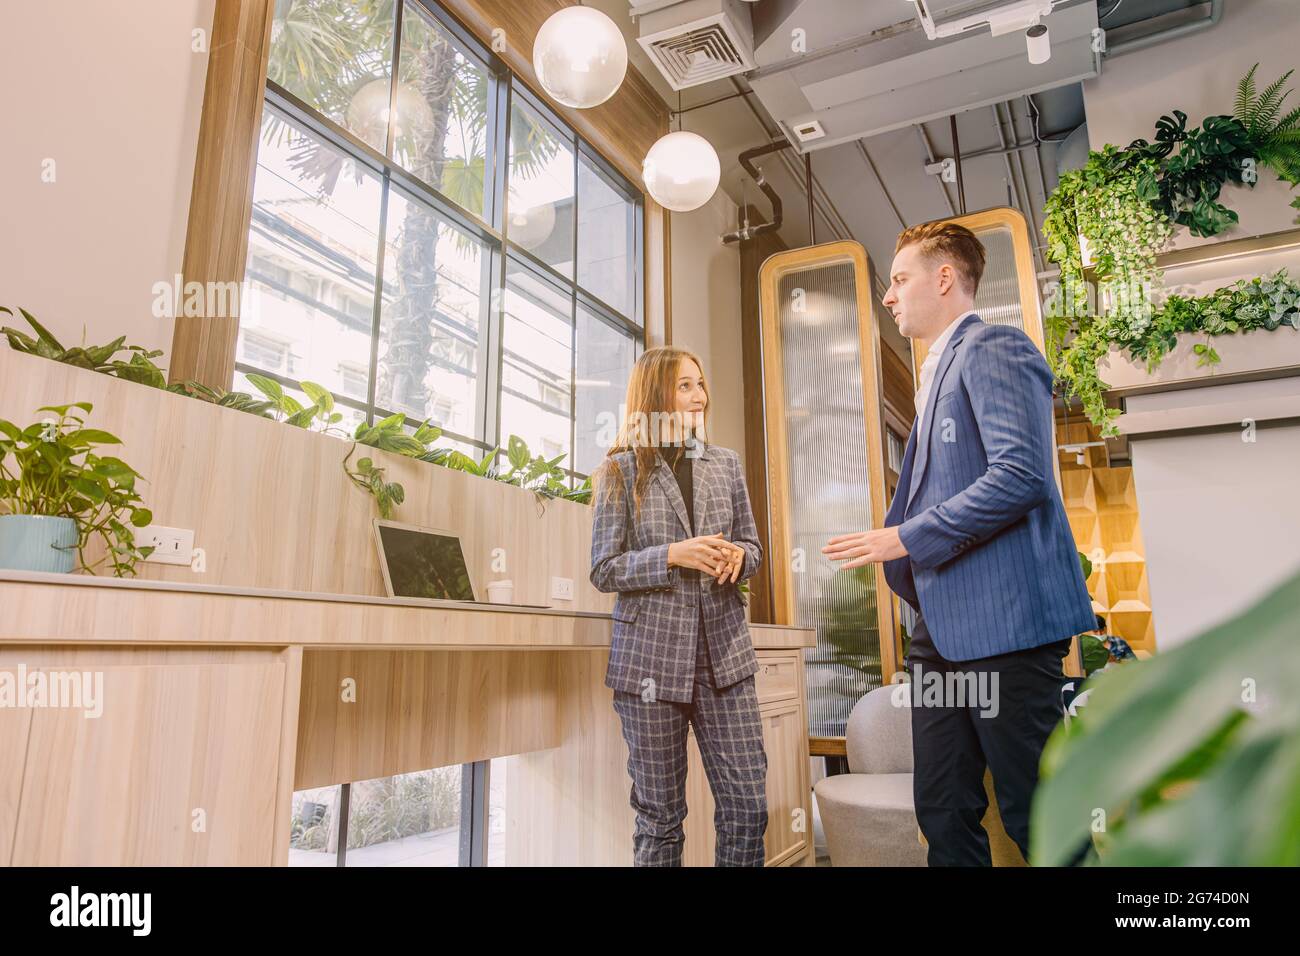 Businesspeople talking together in modern office for business contact or connection. Stock Photo